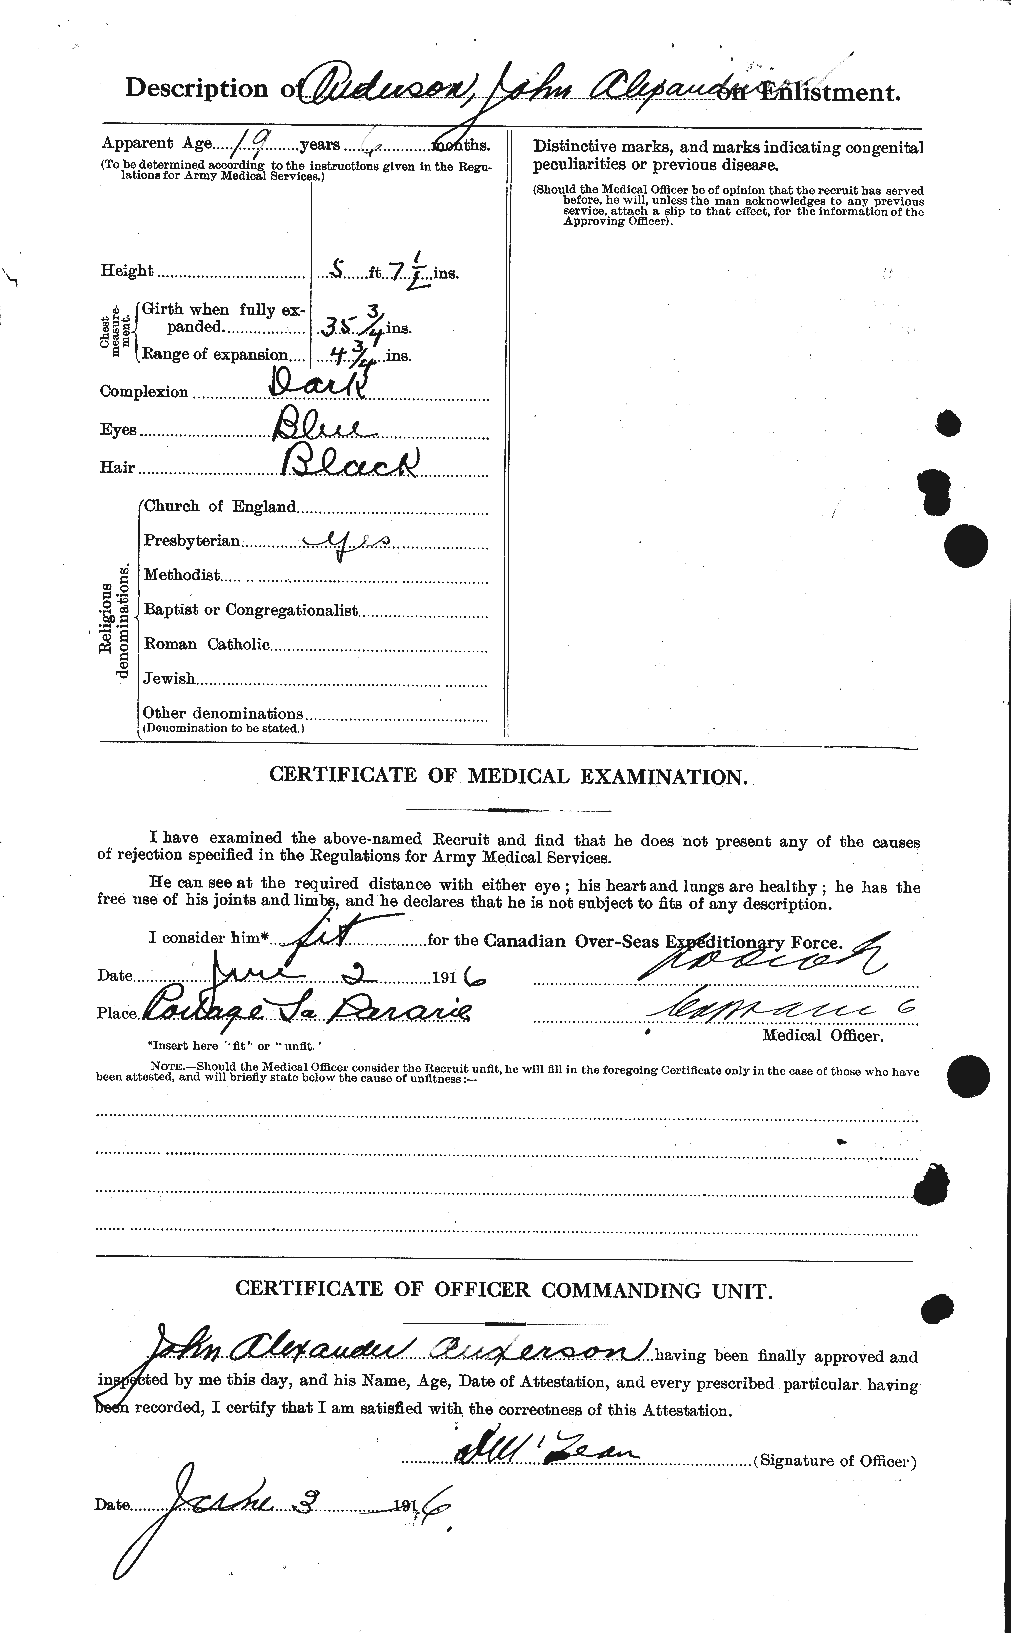 Personnel Records of the First World War - CEF 207689b